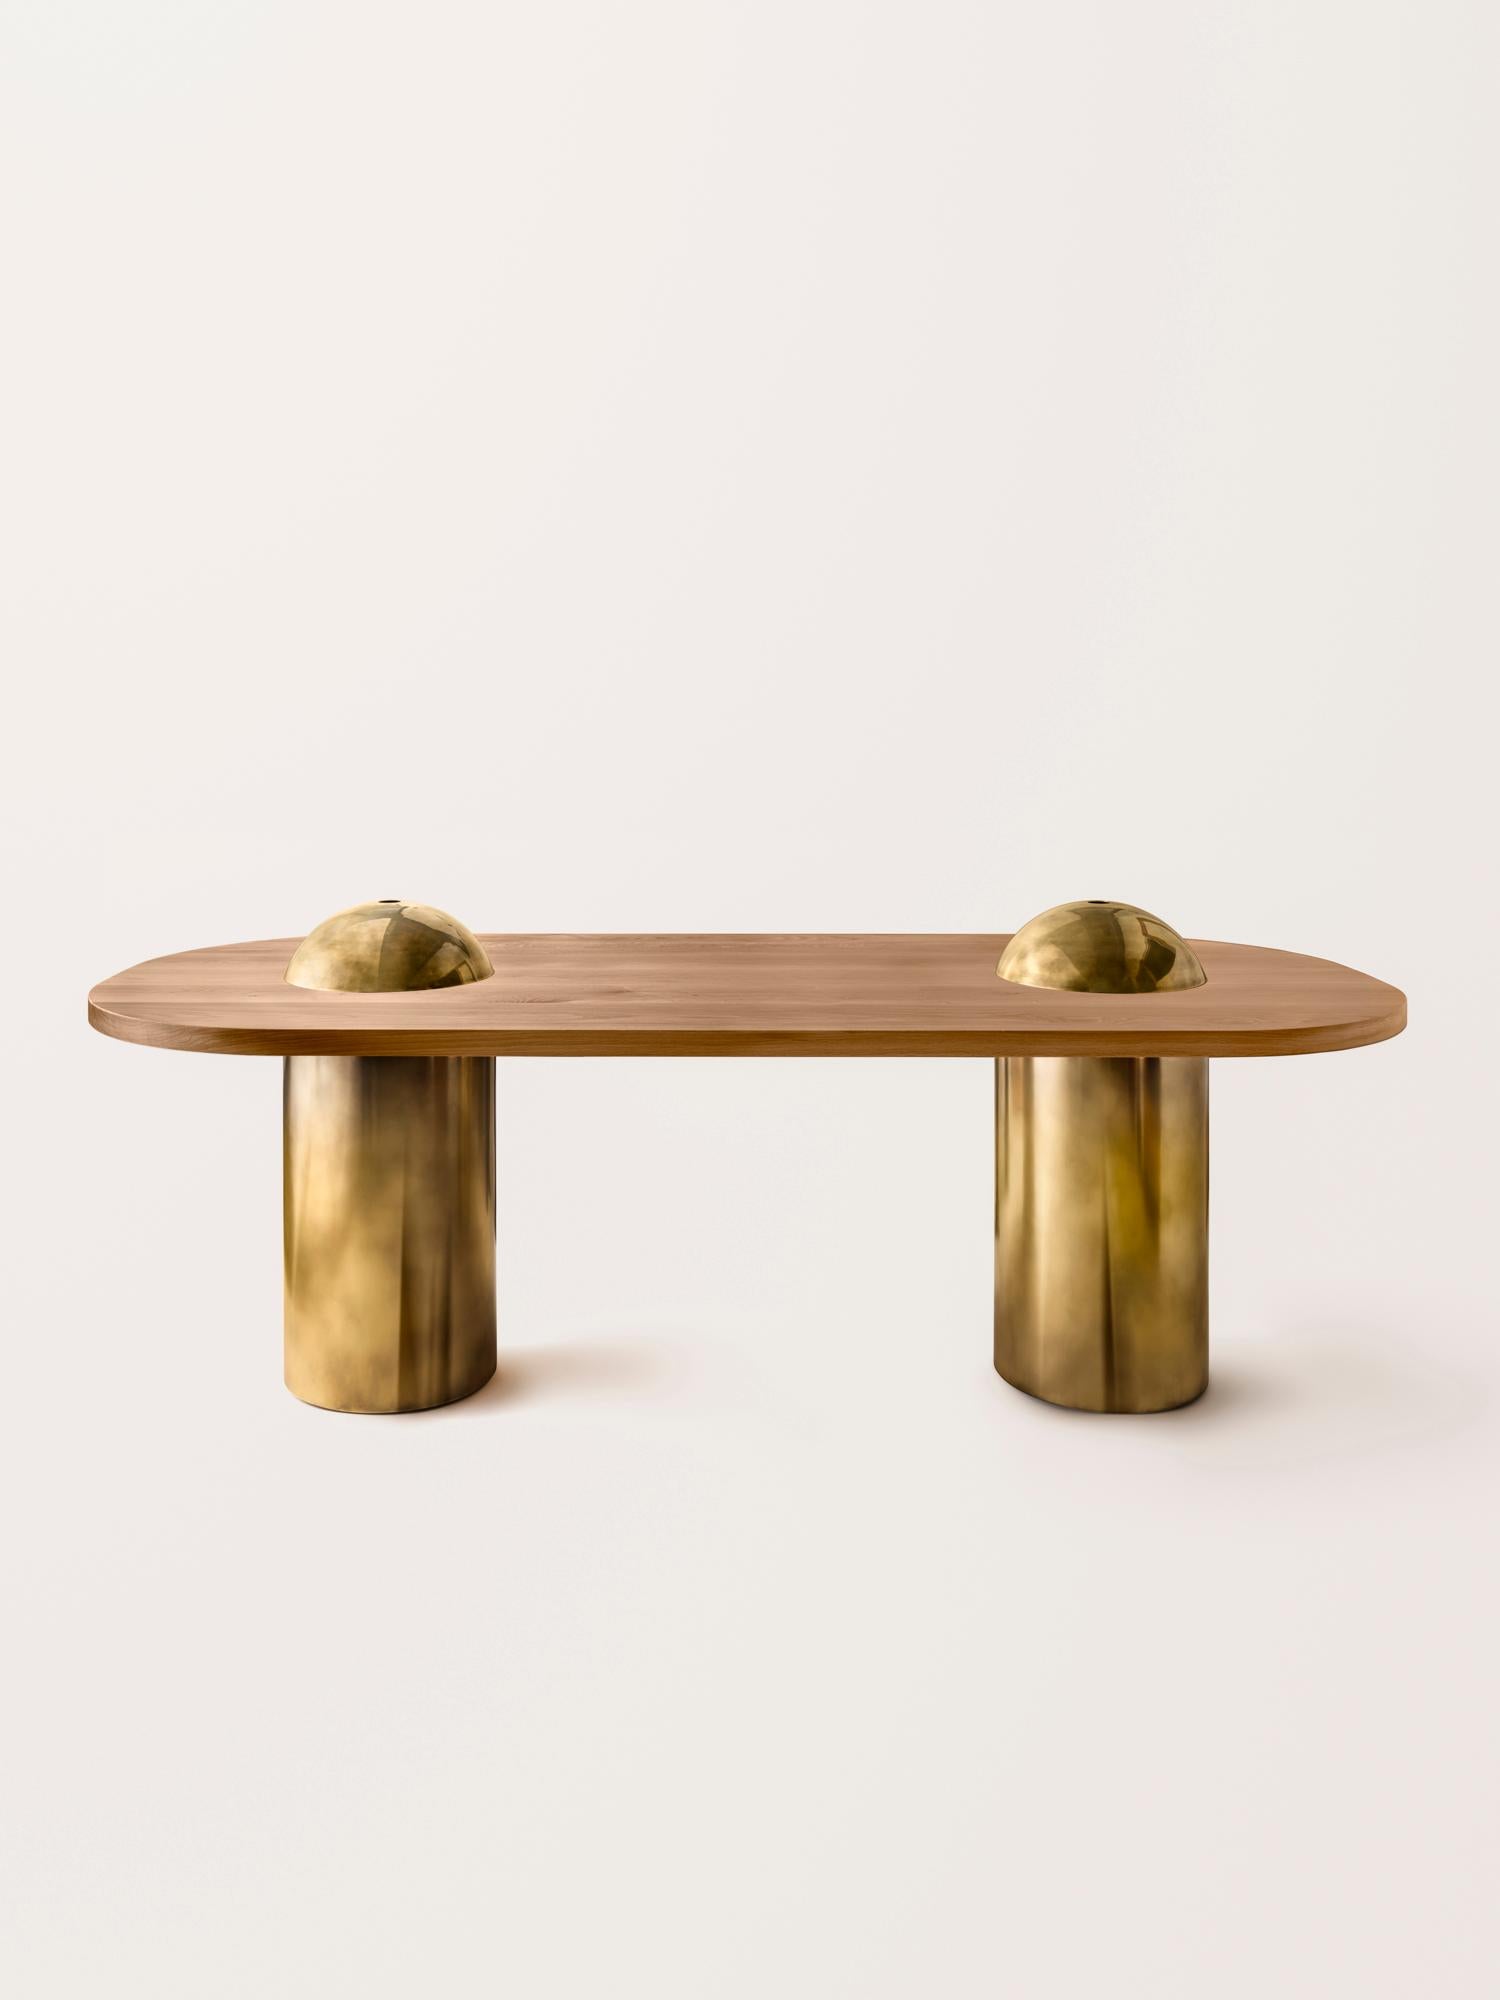 Silo Dining Table - Natural Oak and Burnished Brass For Sale 2